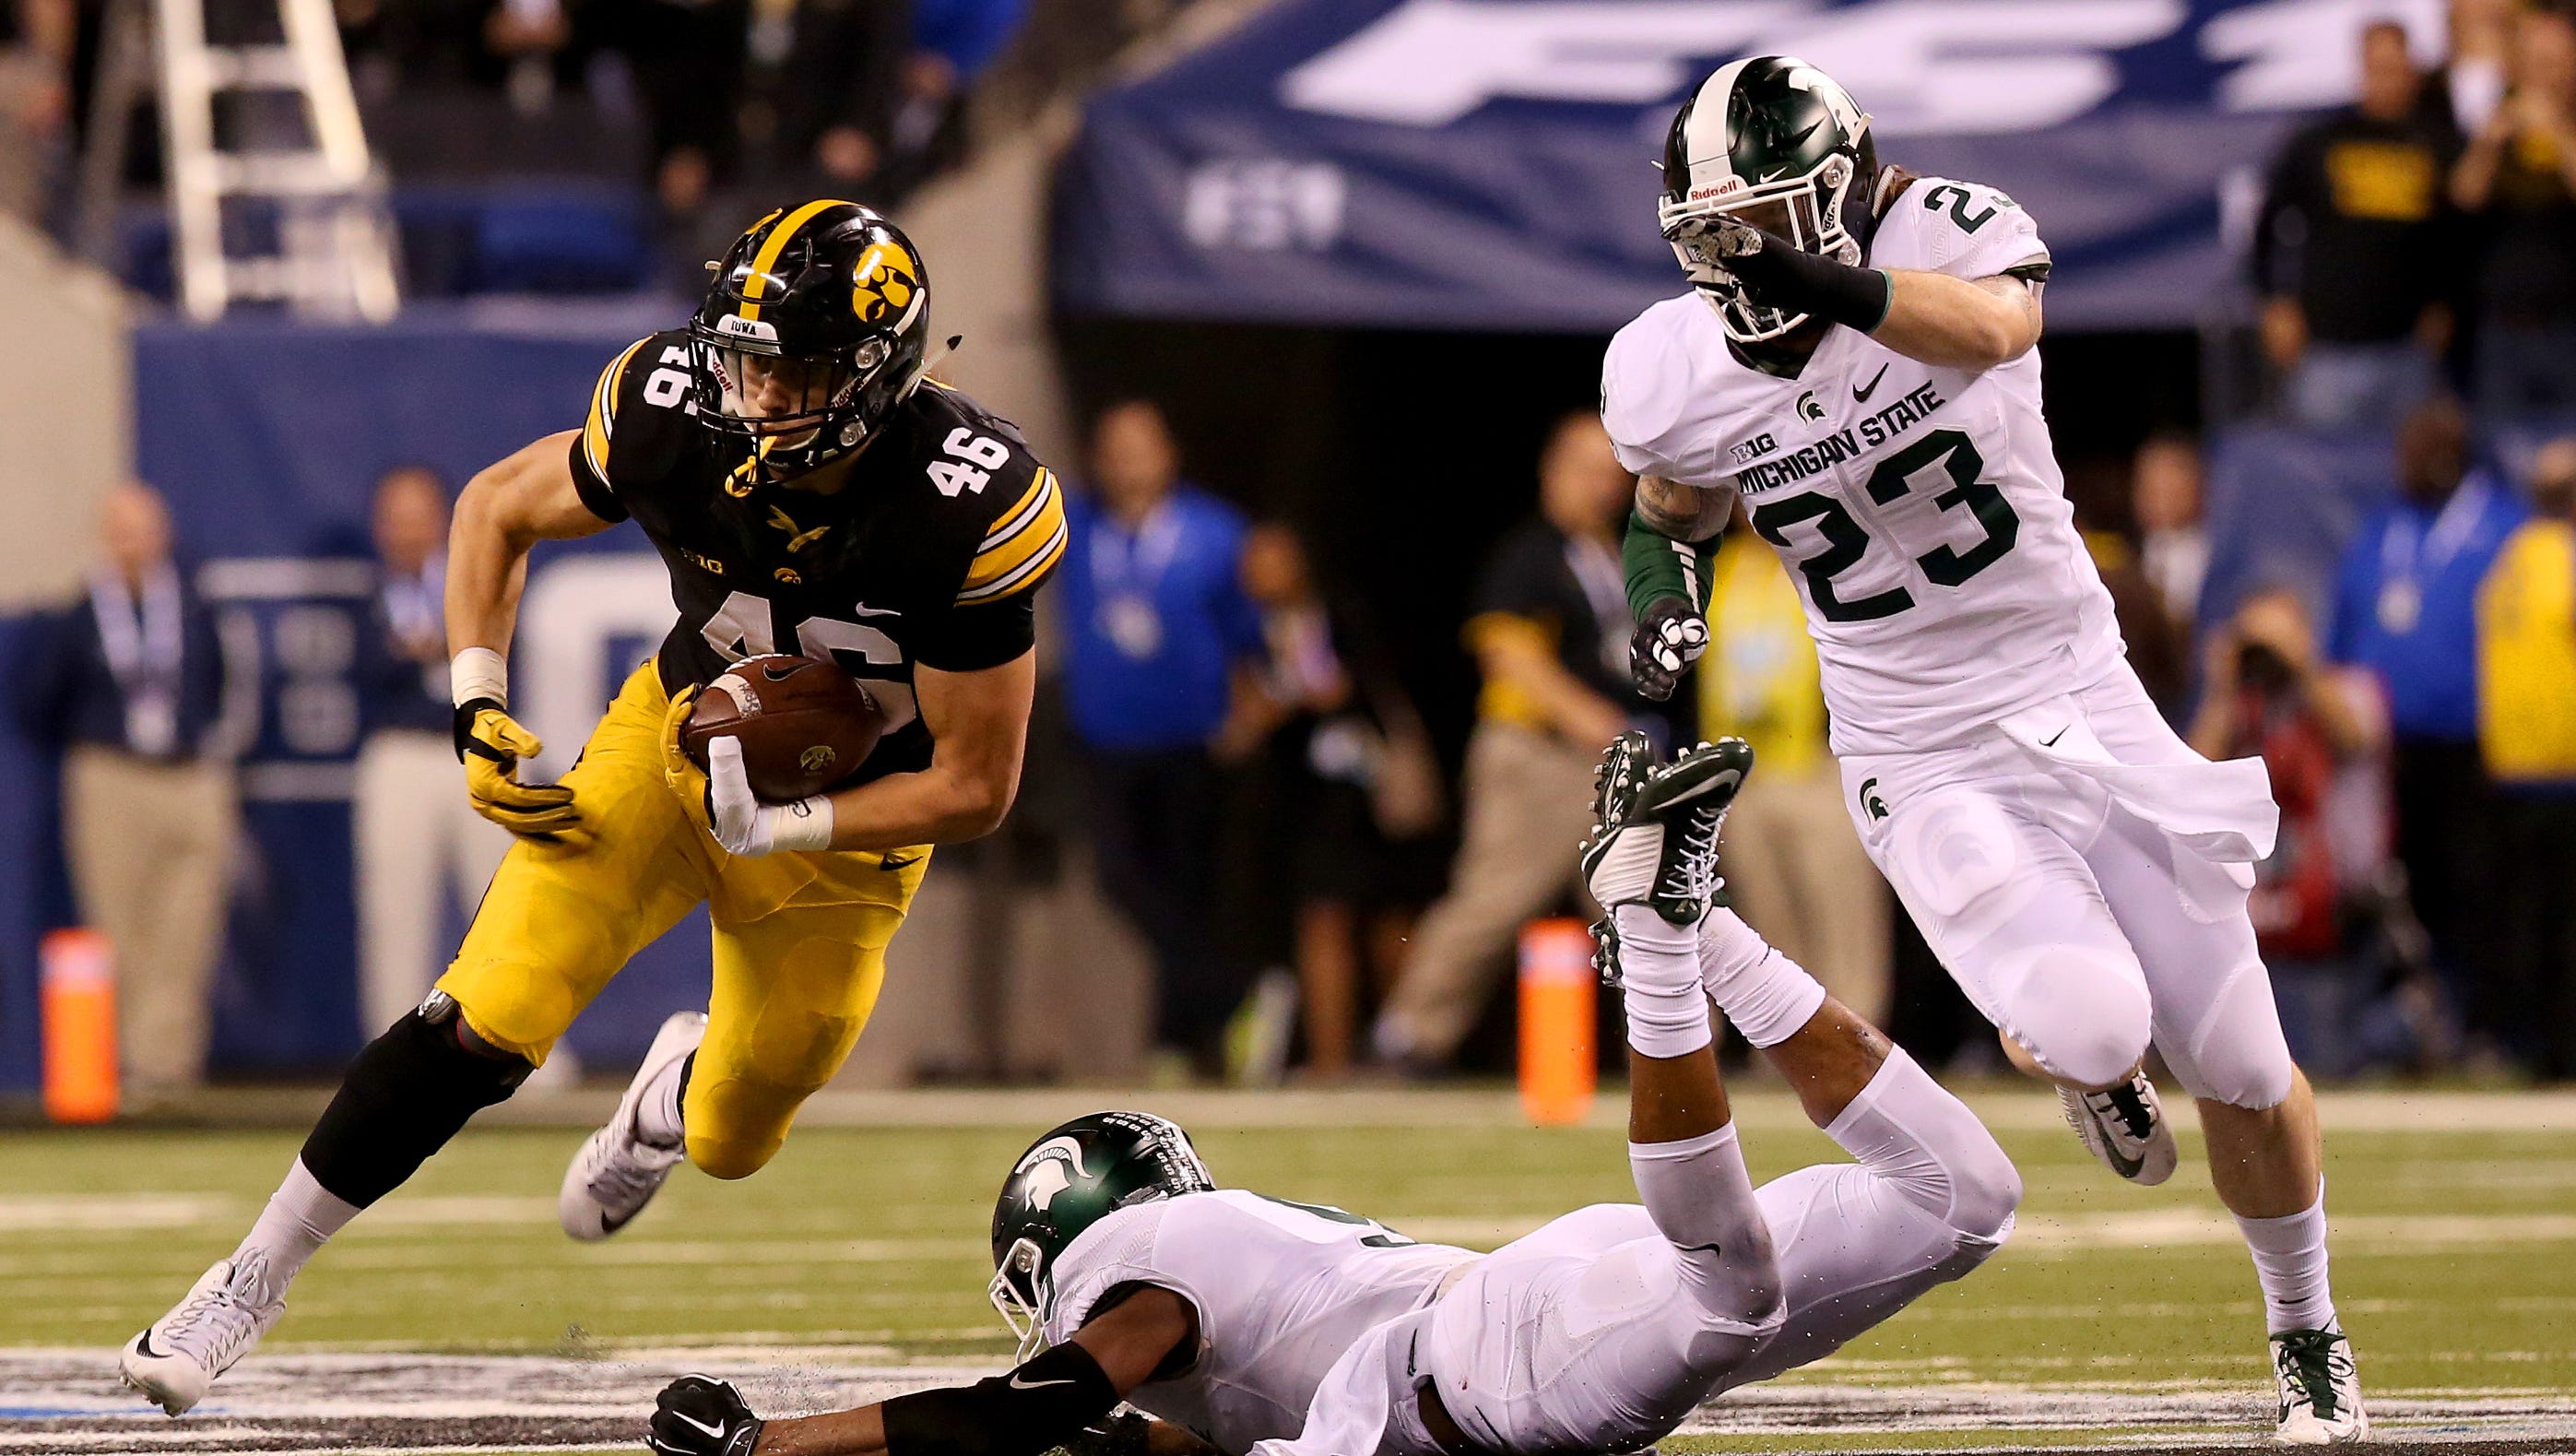 Iowa tight end George Kittle (46) makes Michigan State safety Montae Nicholson (9) miss on the tackle and gets the first down on a long third down against Michigan State during the Big Ten Championship Game at Lucas Oil Stadium on Dec. 5, 2015.